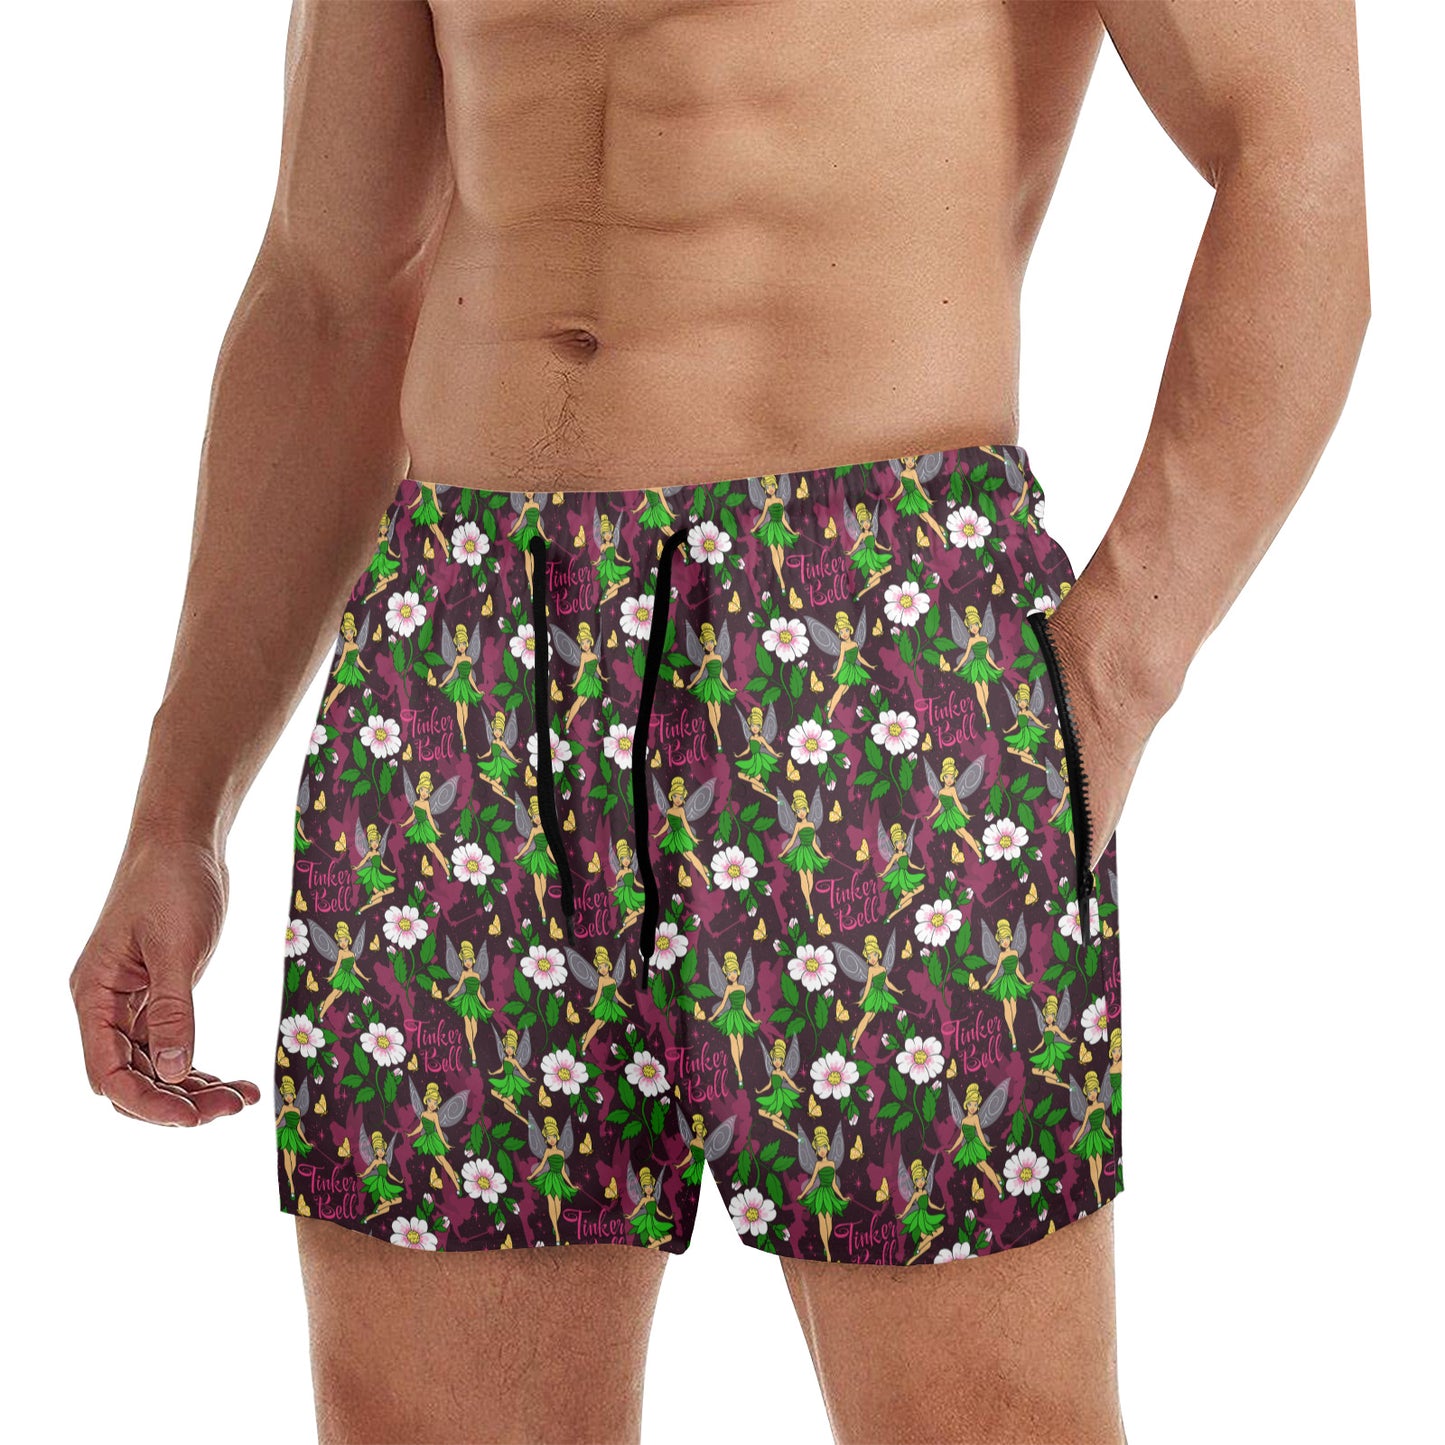 Tinker Bell Men's Quick Dry Athletic Shorts